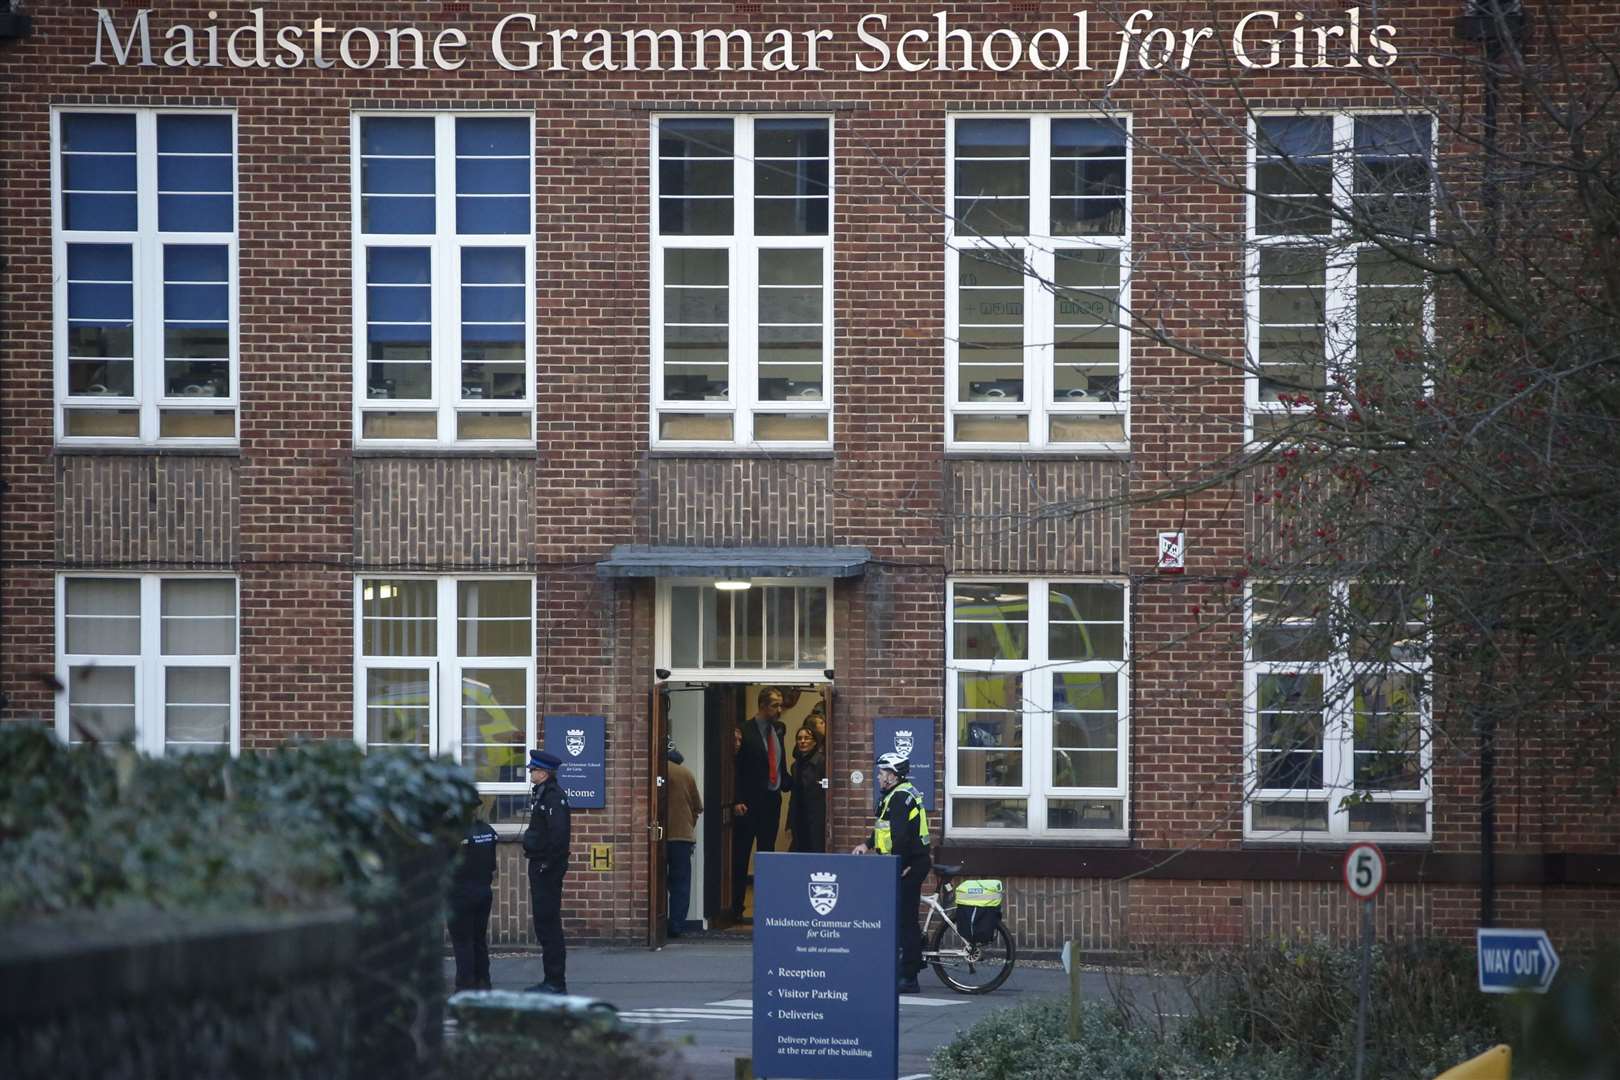 Maidstone Grammar School for Girls, Buckland Rd, Maidstone. Picture: Martin Apps